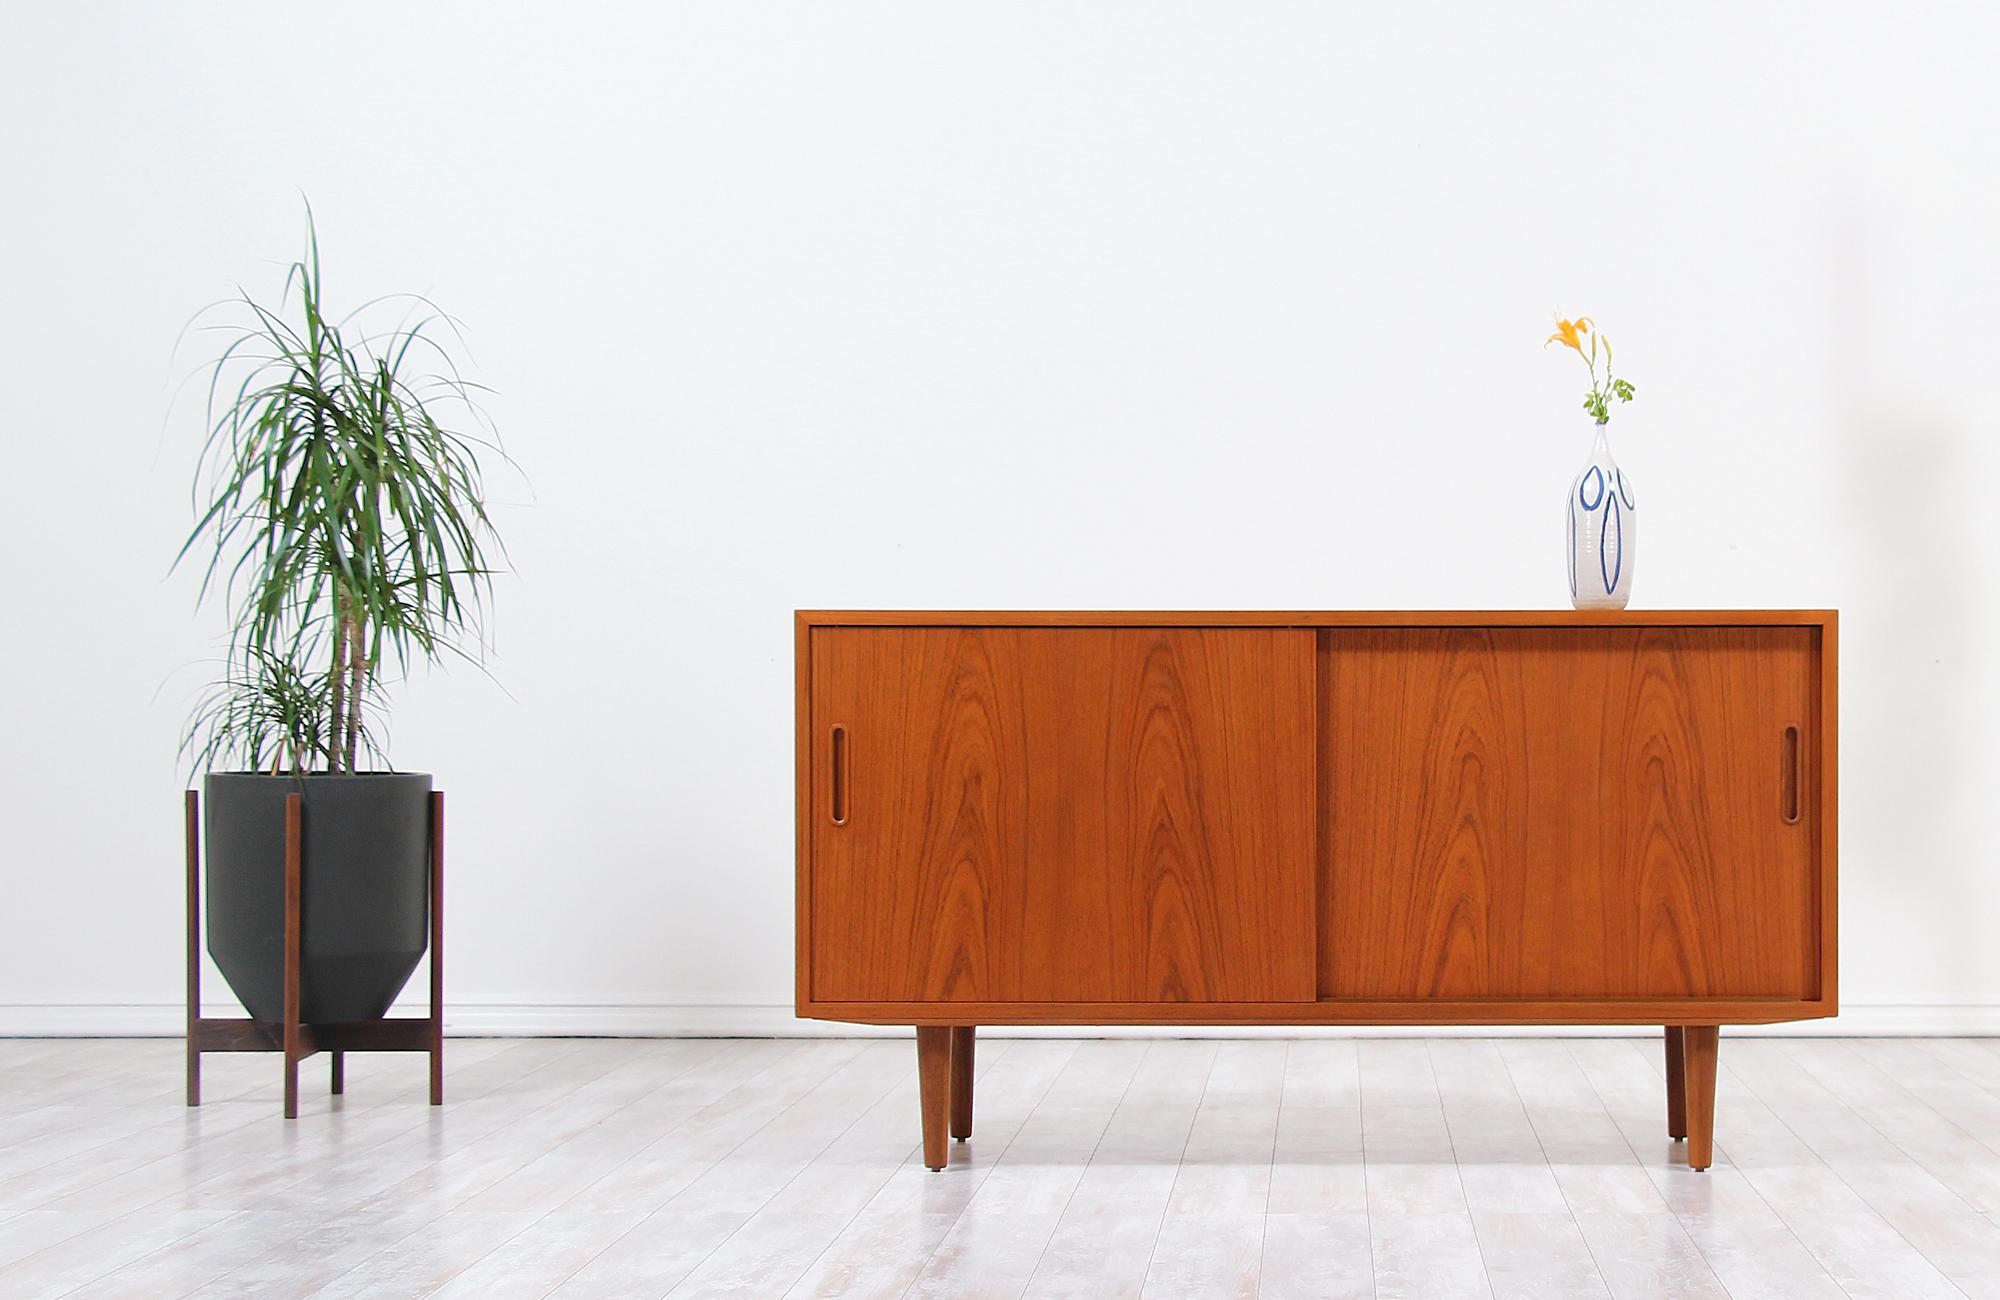 Compact Danish modern credenza designed by Carlo Jensen for Hundevad Co. in Denmark, circa 1960s. This compact credenza features a solid teak wood case with a birch wood interior and two doors that open smoothly revealing ample storage space. The